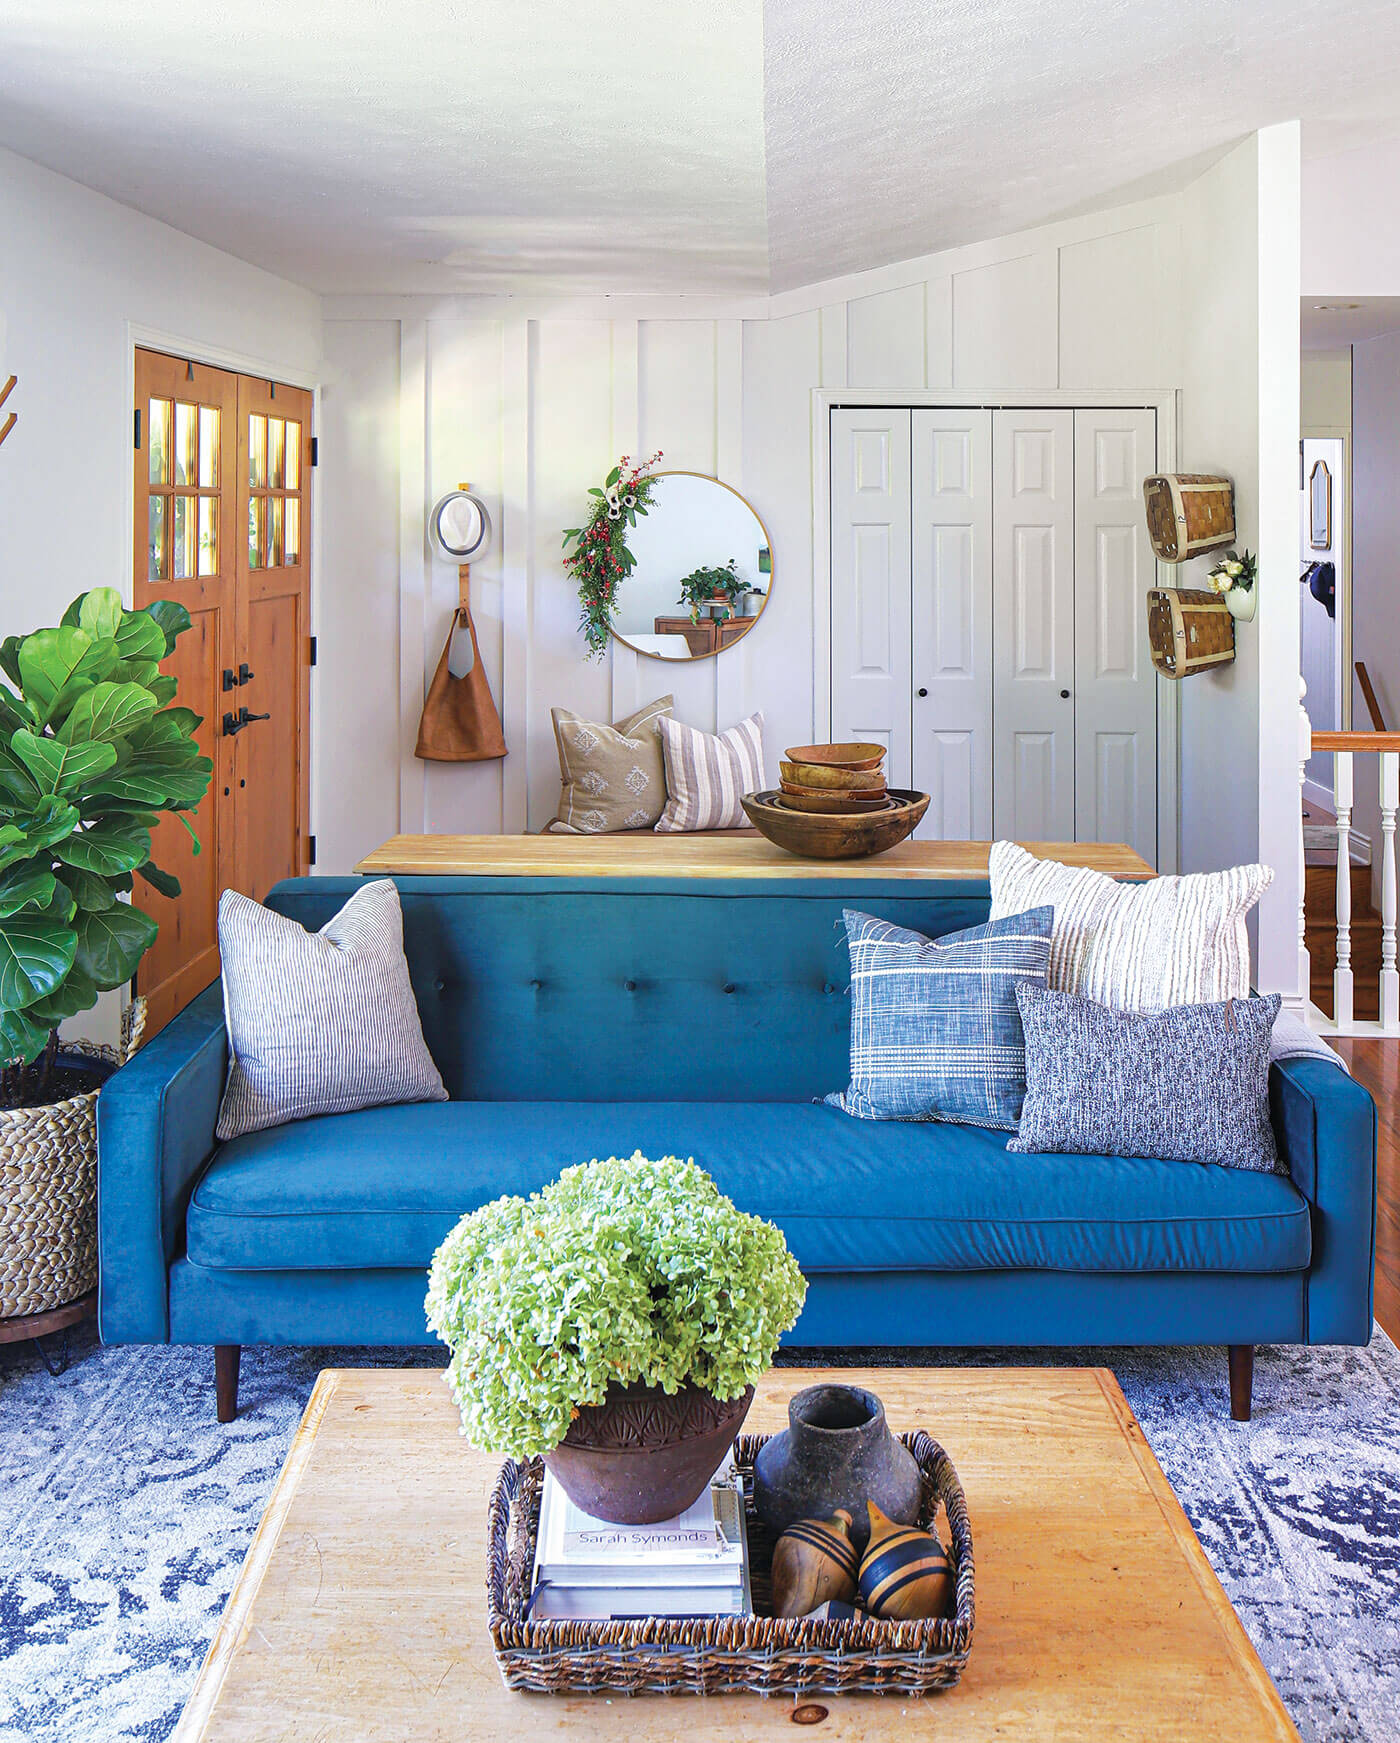 mid century modern farmhouse style in living room with blue sofa and modern wall art